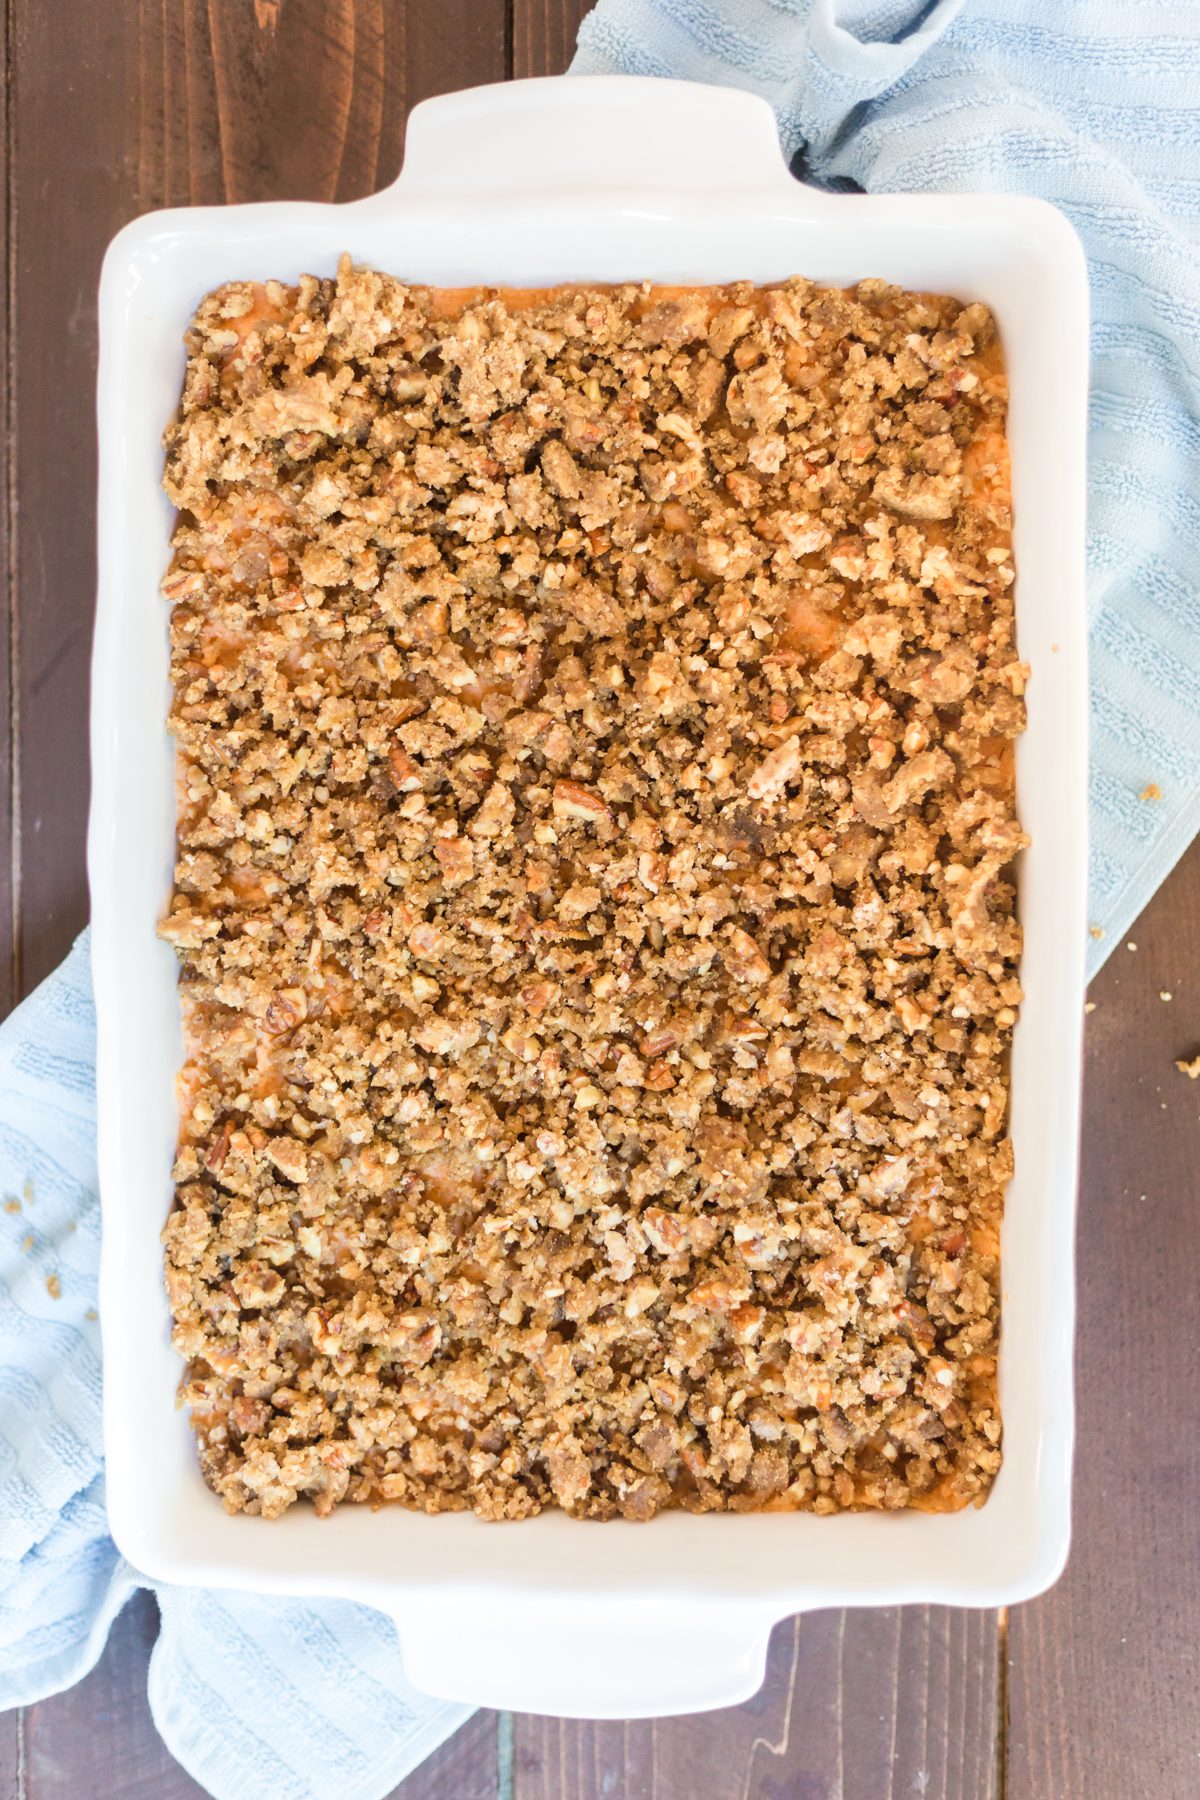 Sweet Potato Casserole with nut crumble topping